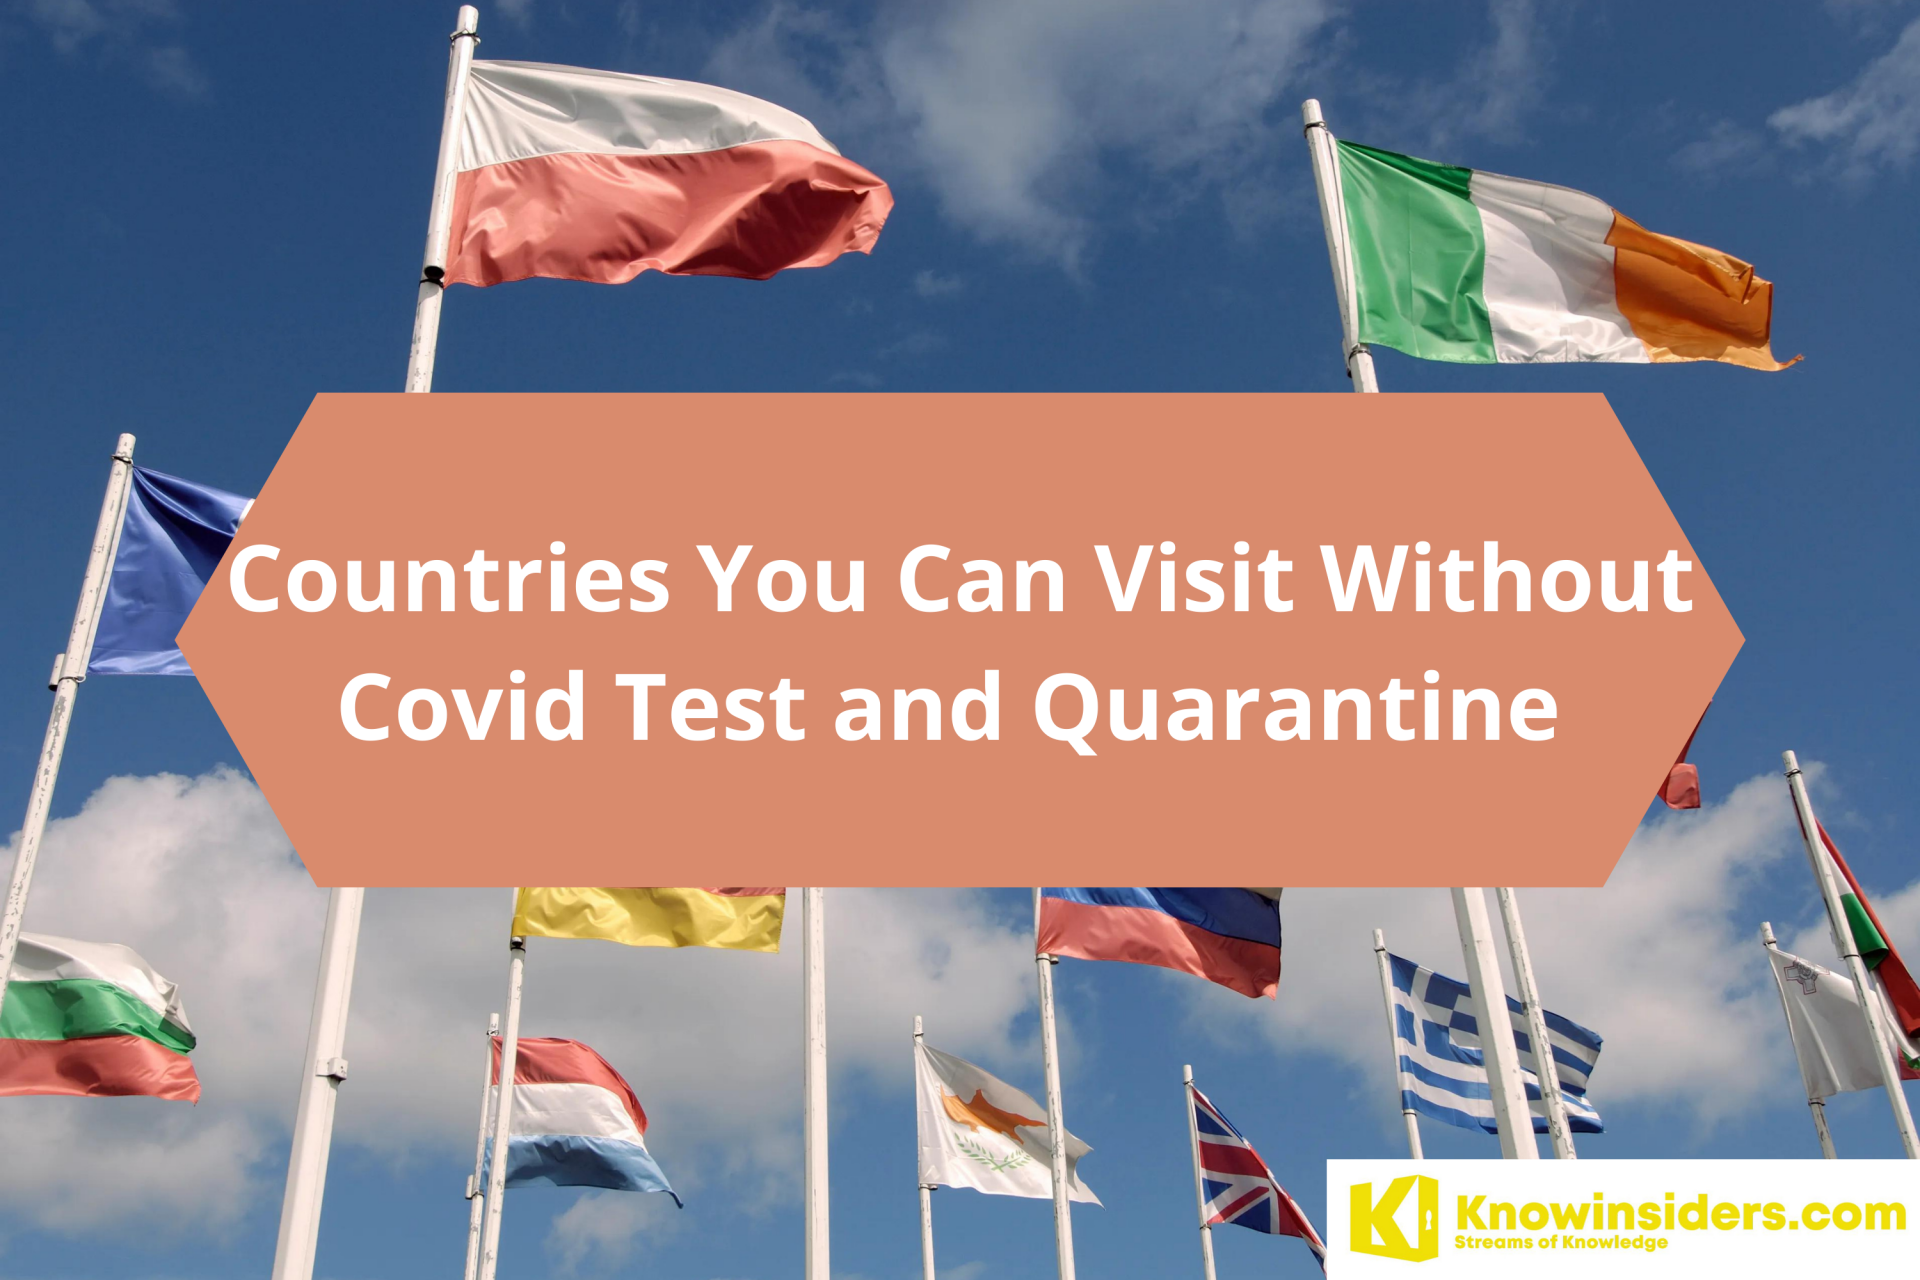 Full List of Countries You Can Visit Without Covid Test and Quarantine